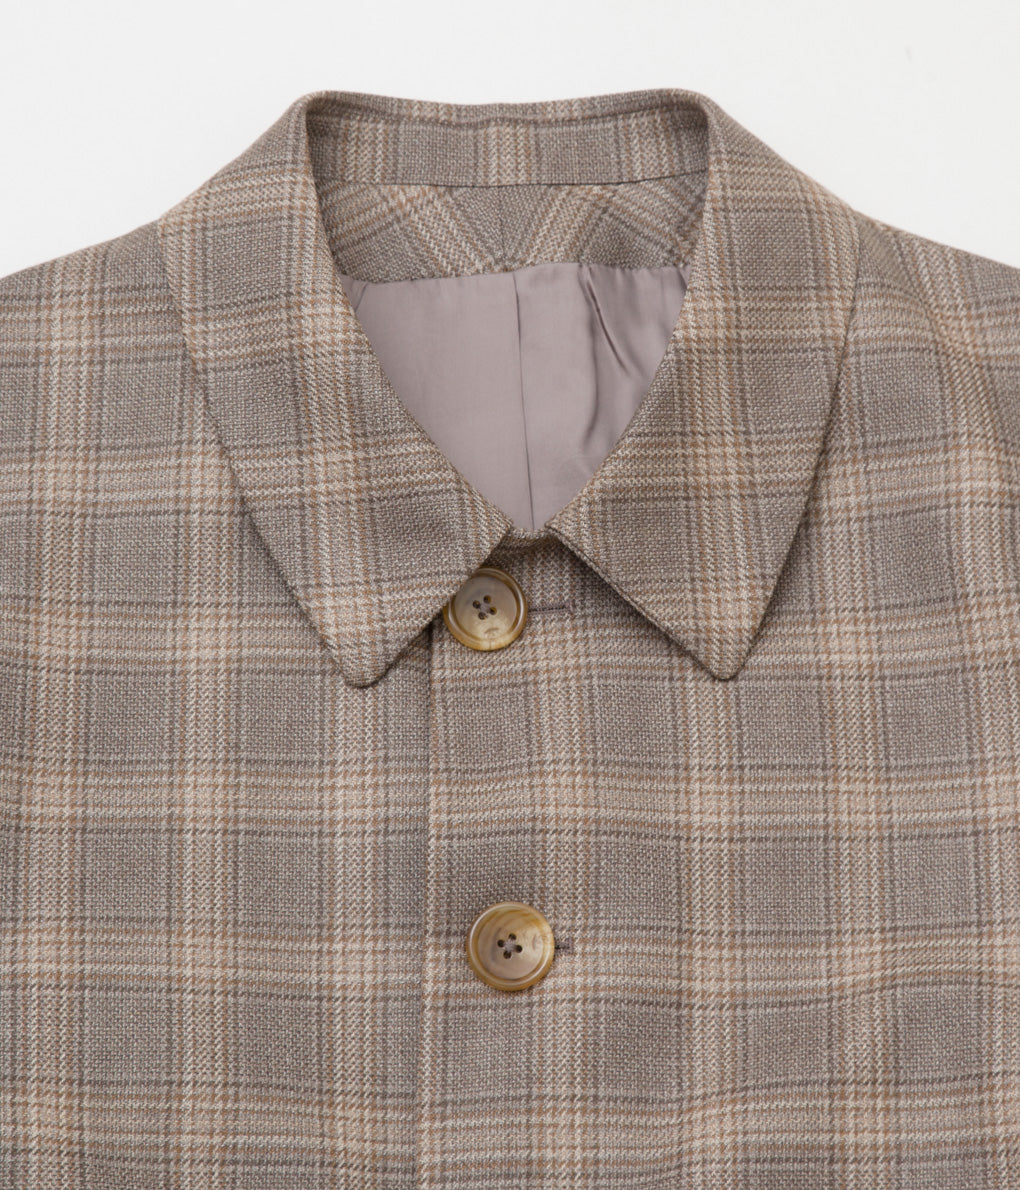 INDIVIDUALIZED CLOTHING "BAL COLLAR TOP COAT" (BROWN PLAID)